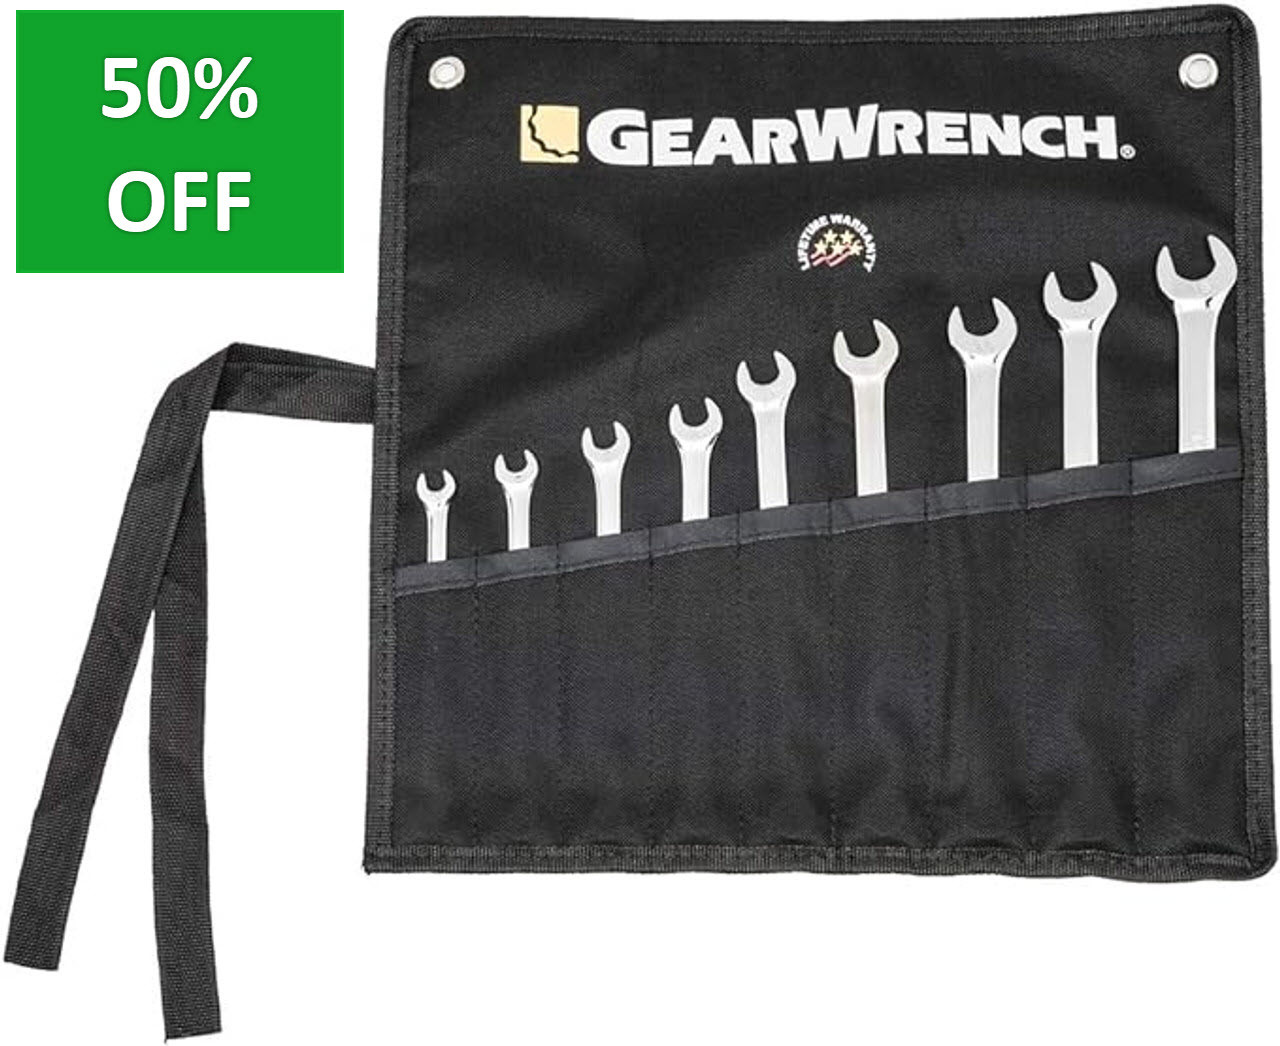 GEARWRENCH 81932 12 Point Long Pattern Combination Metric Wrench 9-Pieces Set with Tool Roll